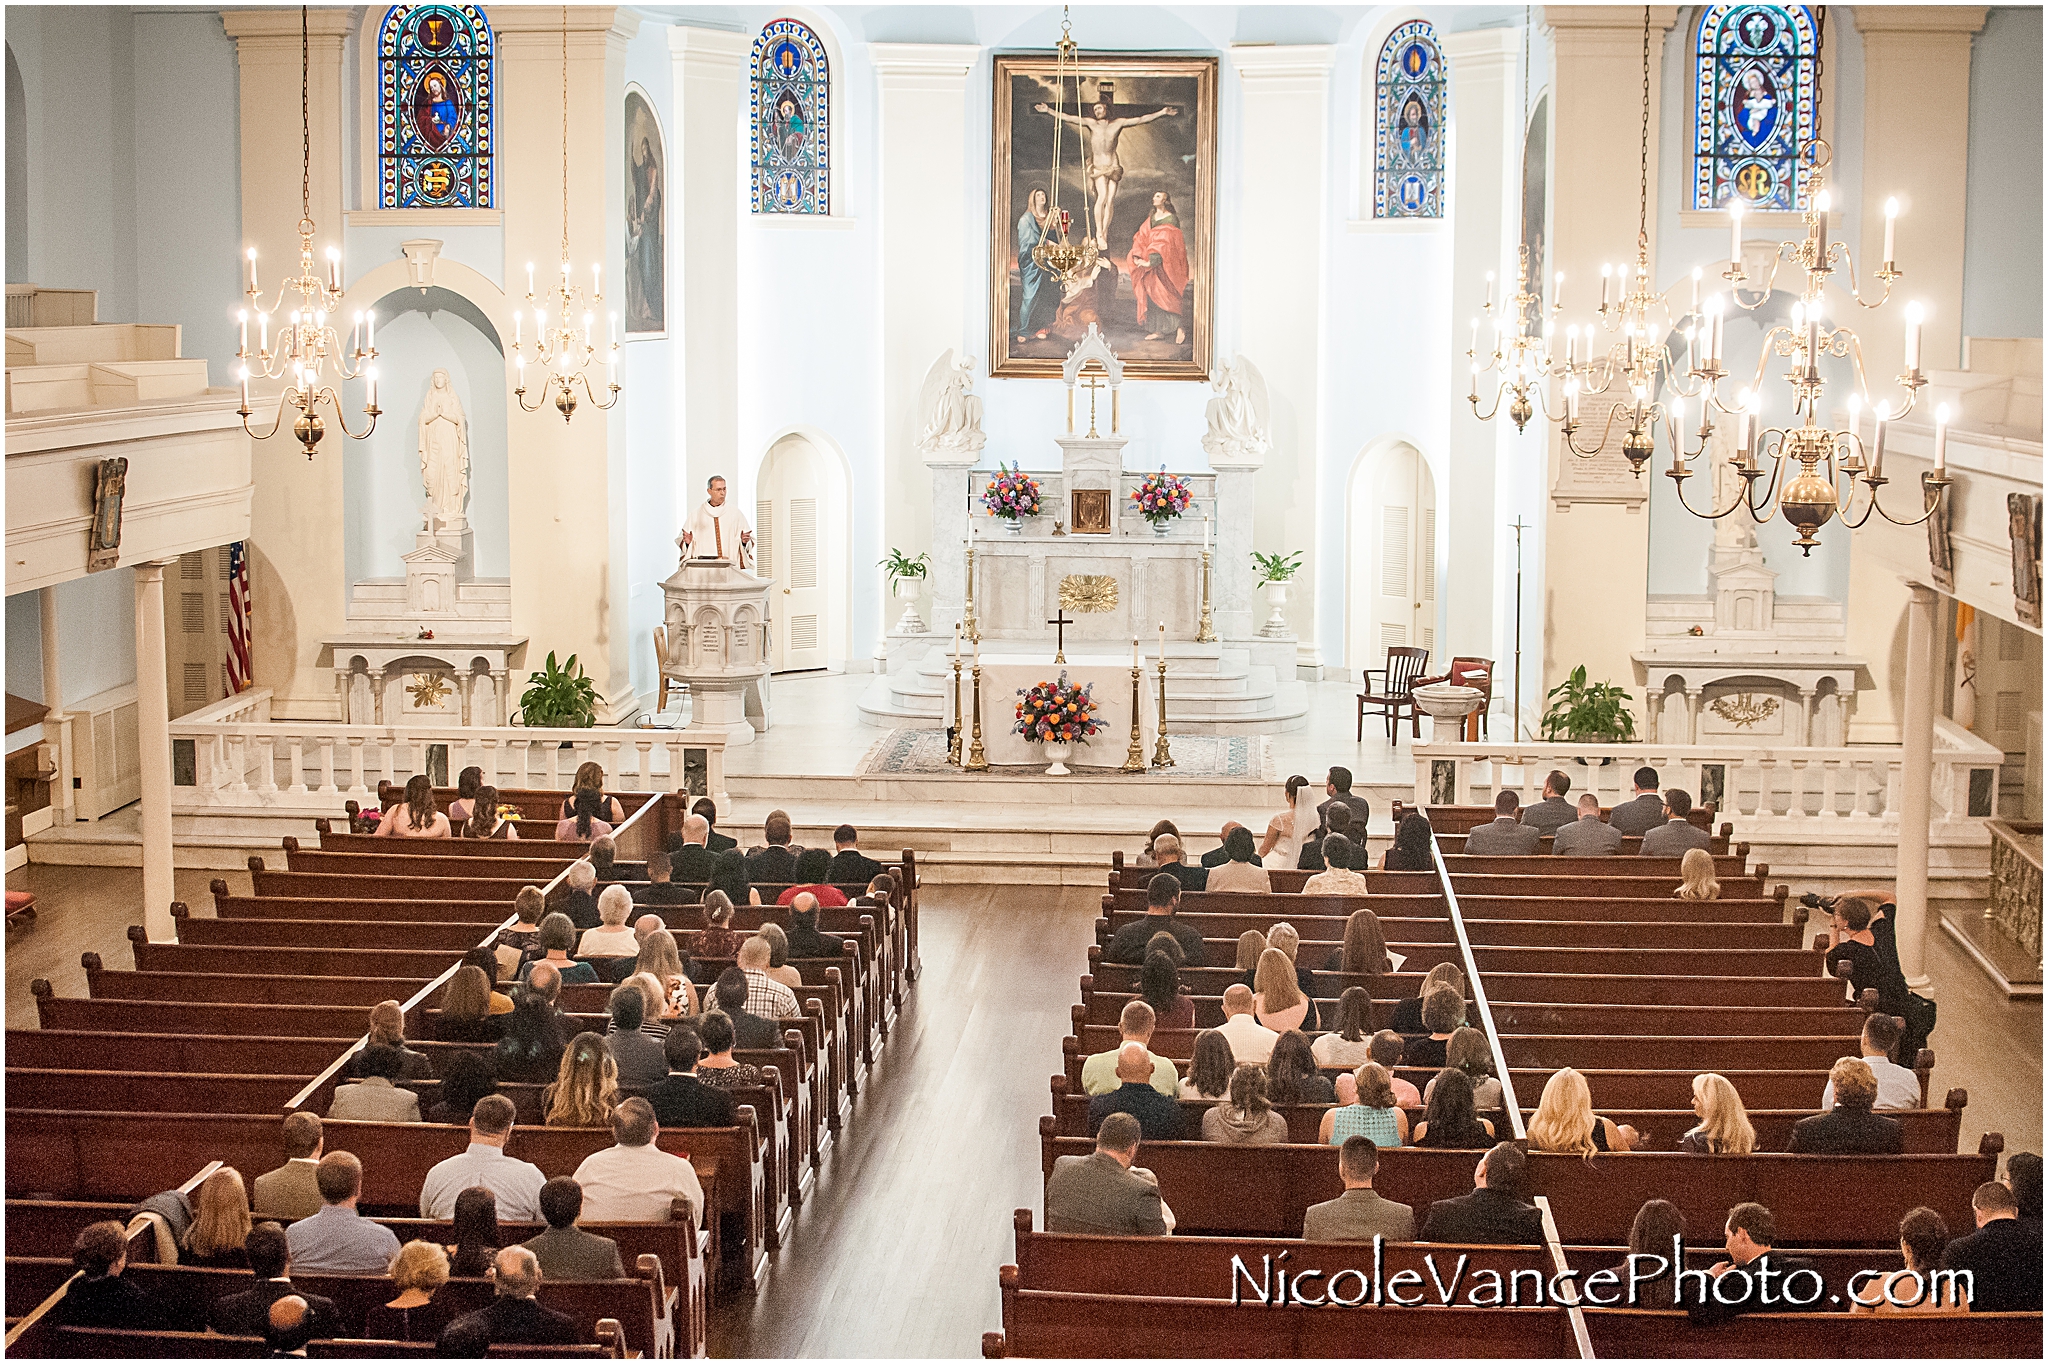 The view from the balcony during the wedding ceremony at St Peter's Catholic Church in Richmond, Virginia.